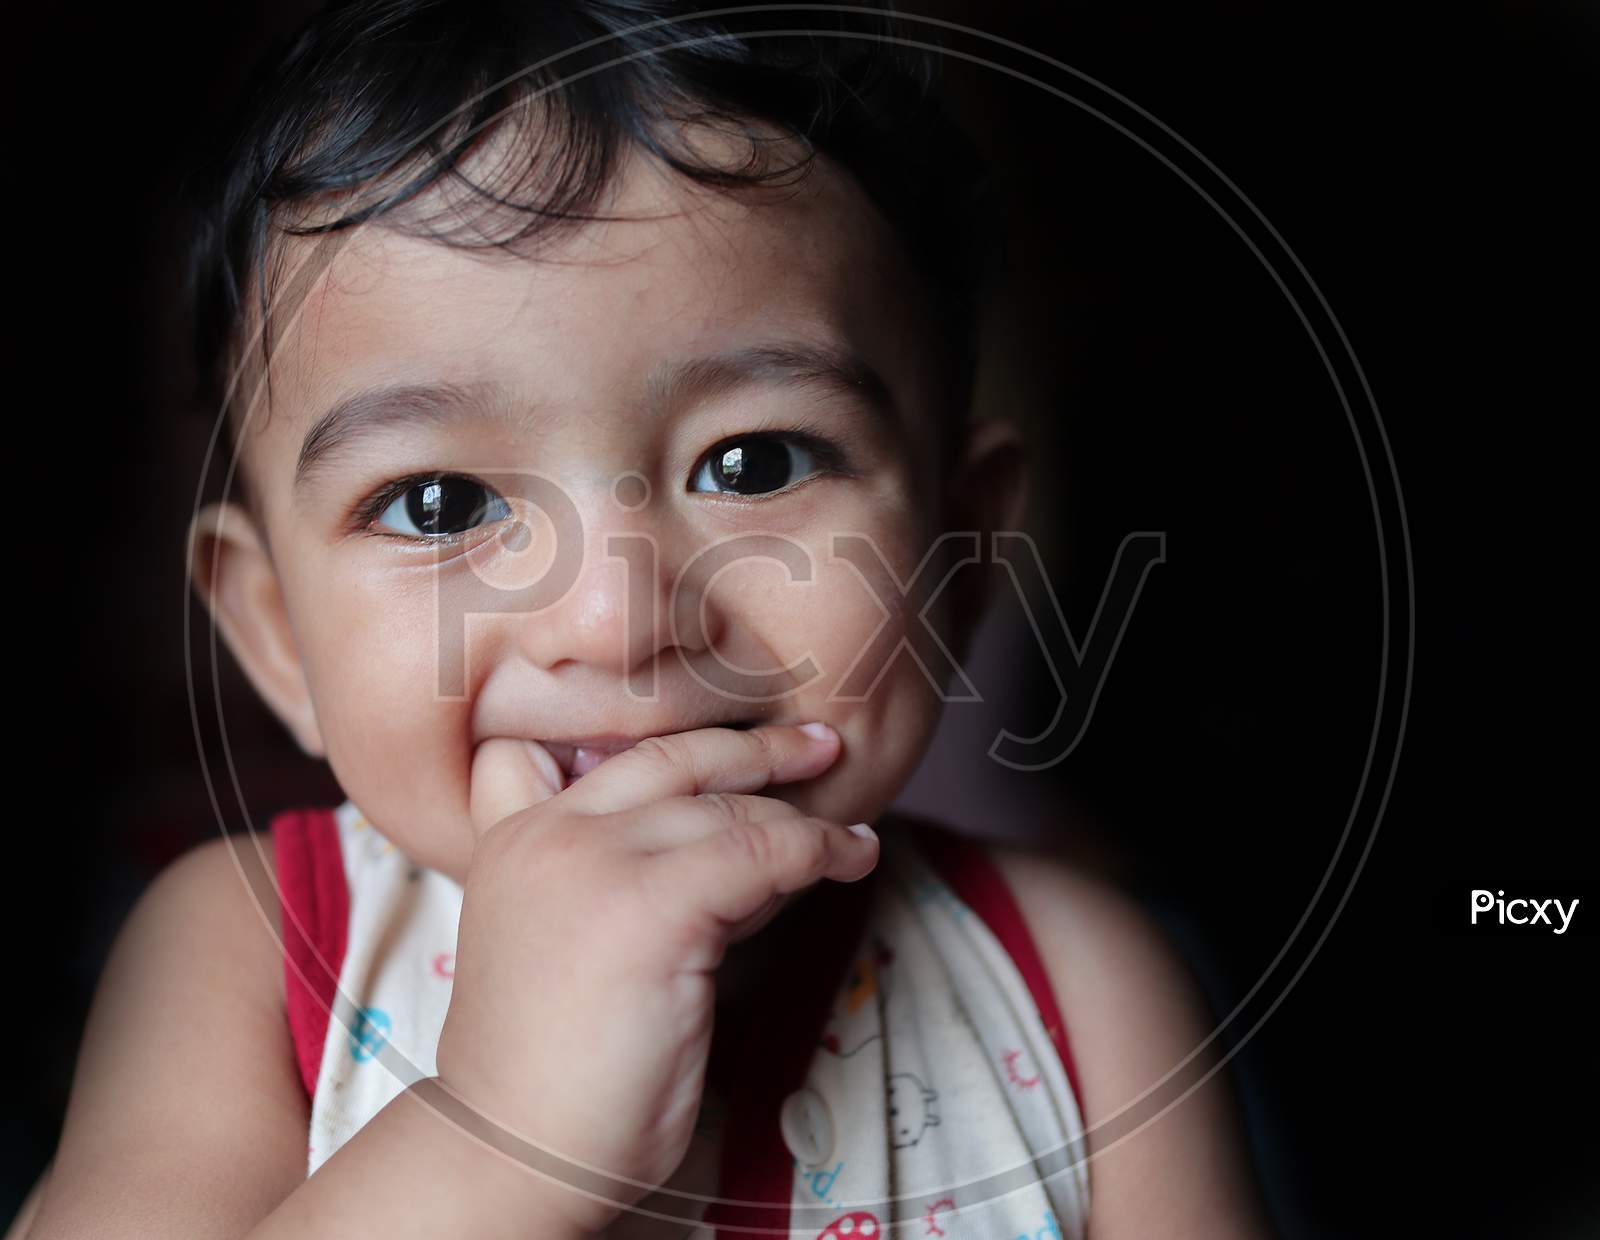 A Head Shot Portrait Of An Adorable Indian Baby Looking At The Camera With Selective Focus On Eyes With Black Background